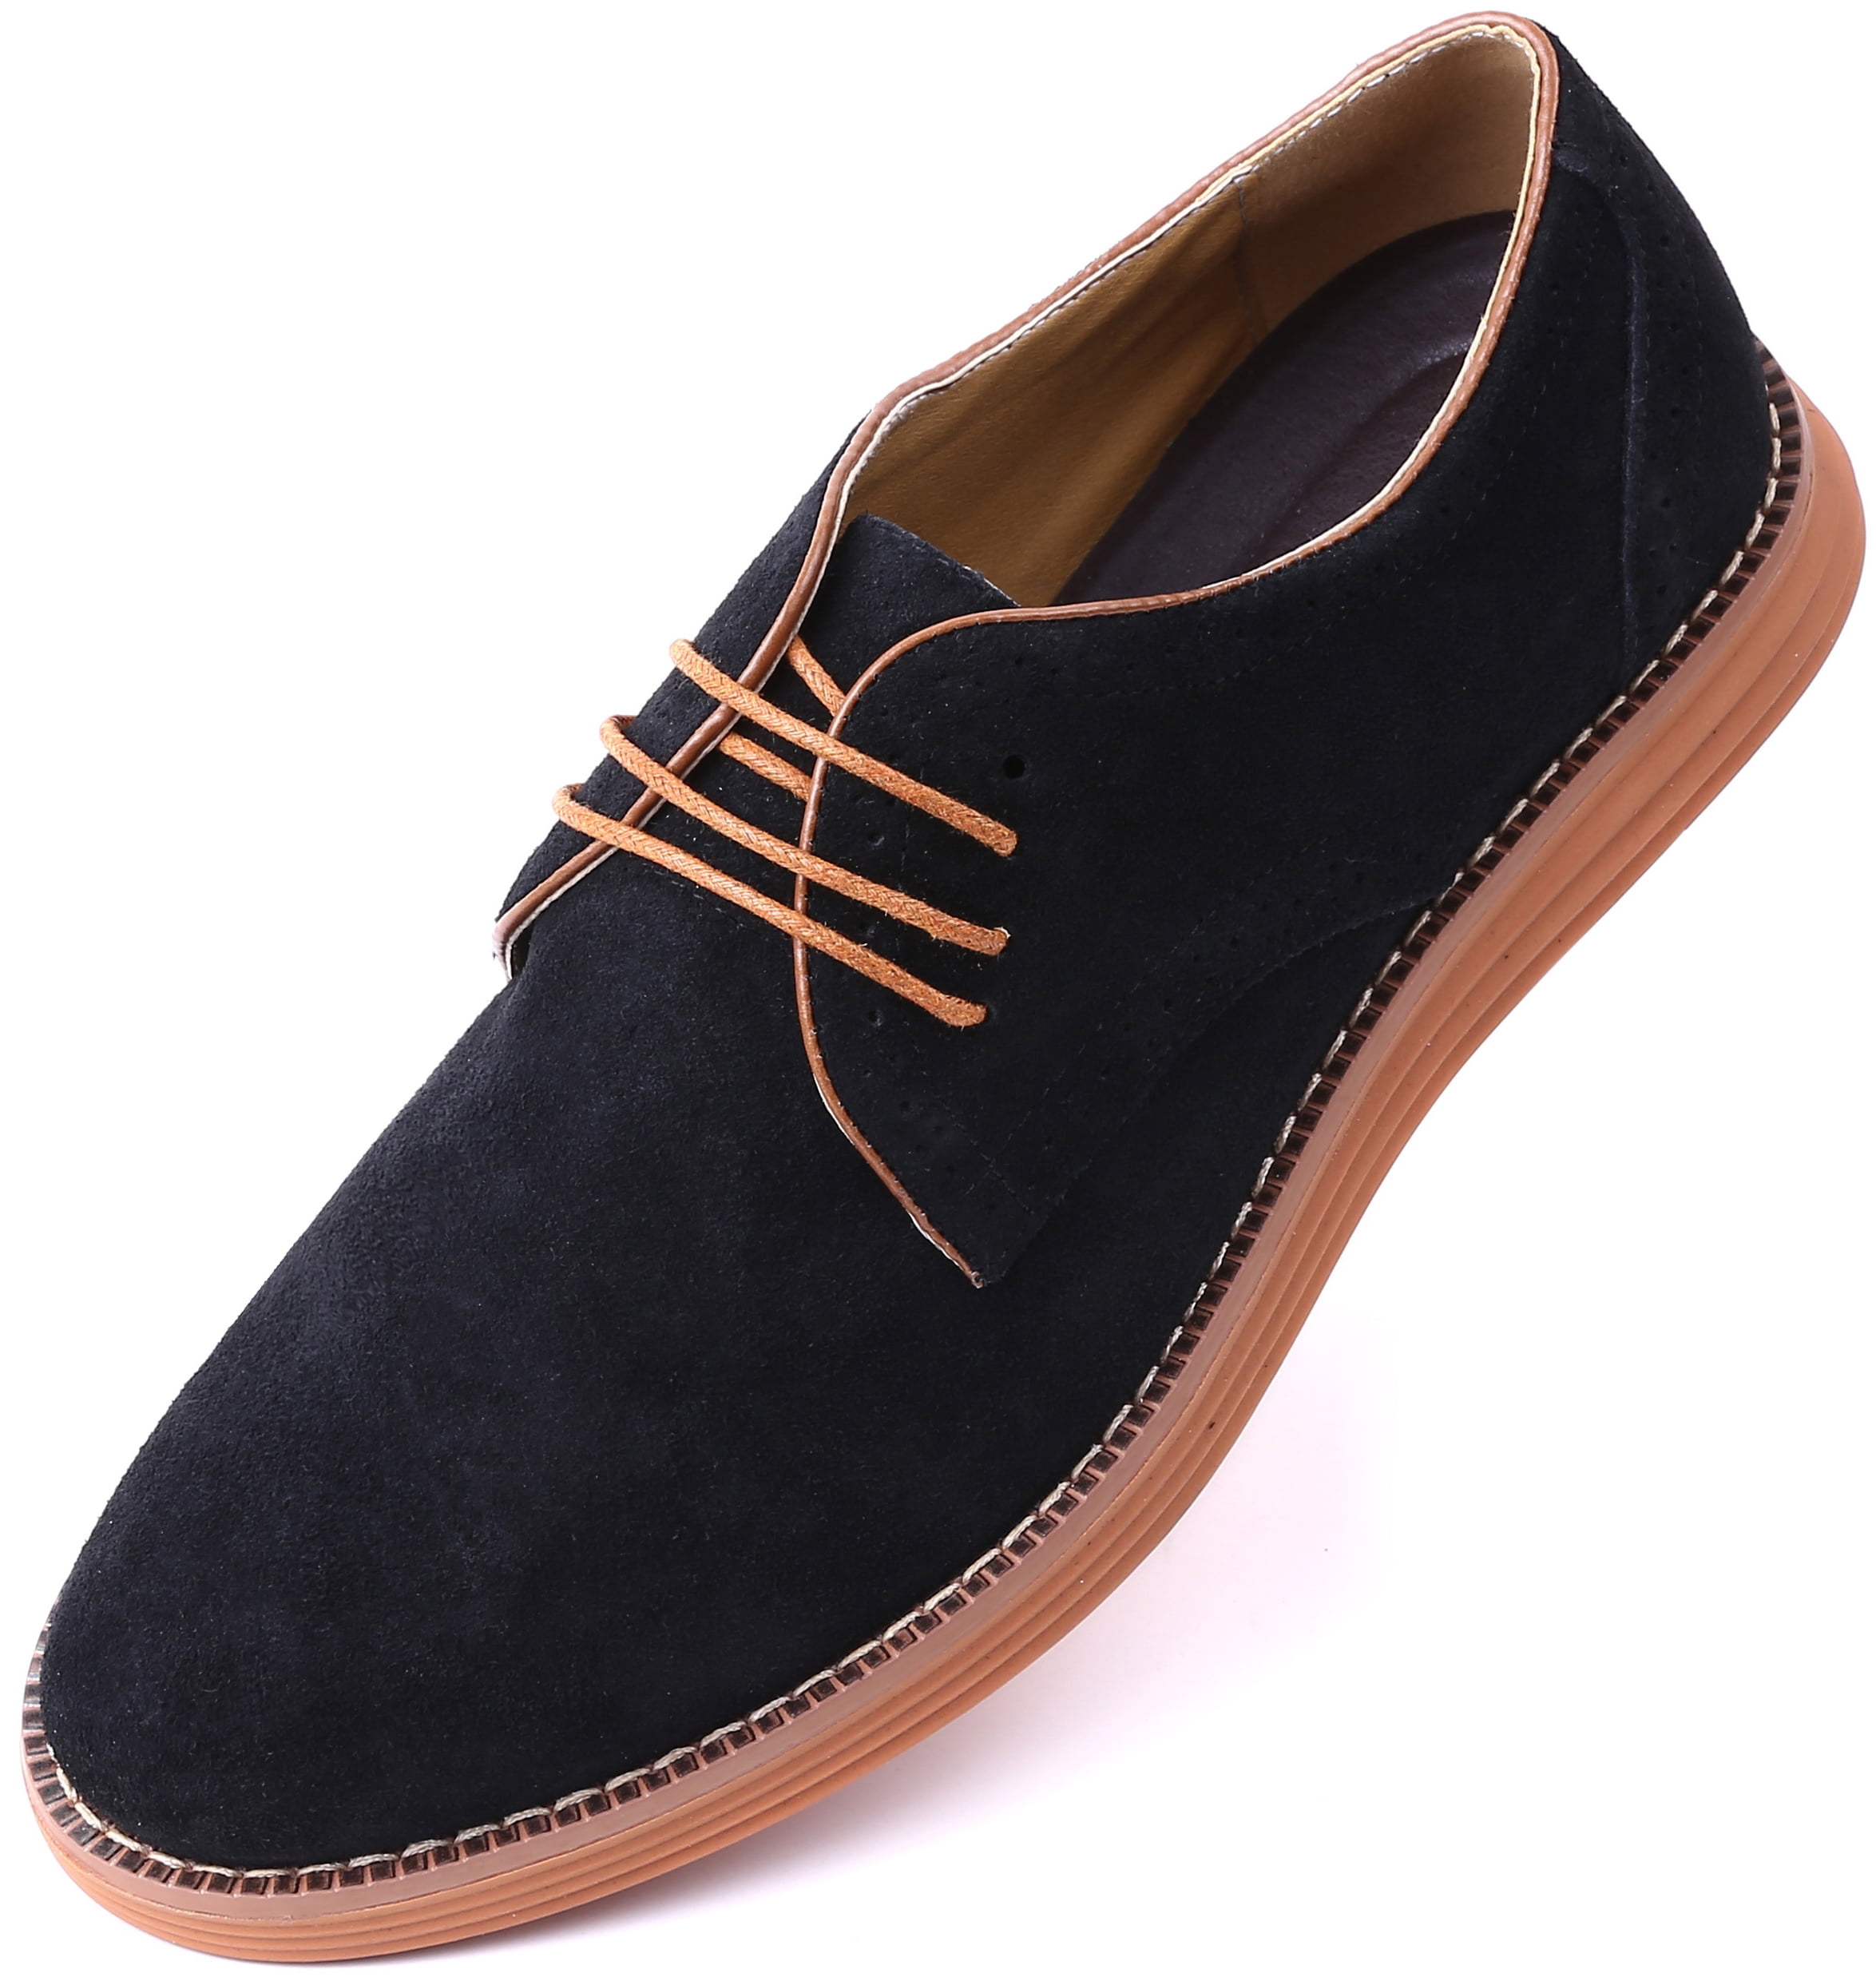 suede shoes business casual